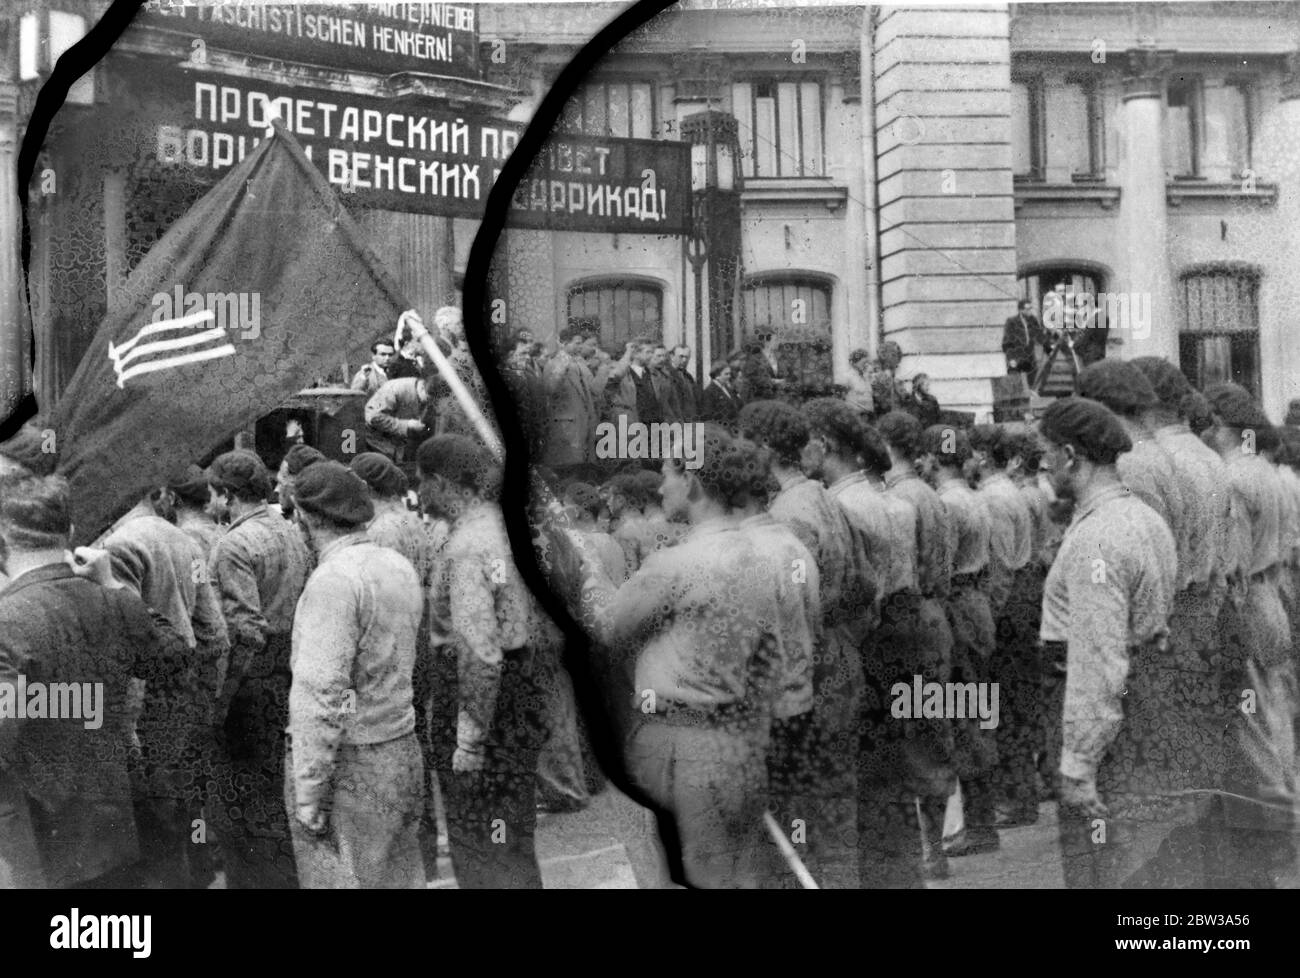 Austrian Socialists feted in Moscow after fleeing their homeland . All Moscow turned out to welcome several hundred members of the Austrian Schutzbund , the socialist organisation , who are exiled from their country after having fought against the Government forces in the recent civil war in Austria . The refugees had sought refuge in Czechoslovakia before going to Russia . Photo shows members of the Schutzbund in uniform on arrival in Moscow . 30 April 1934 Stock Photo